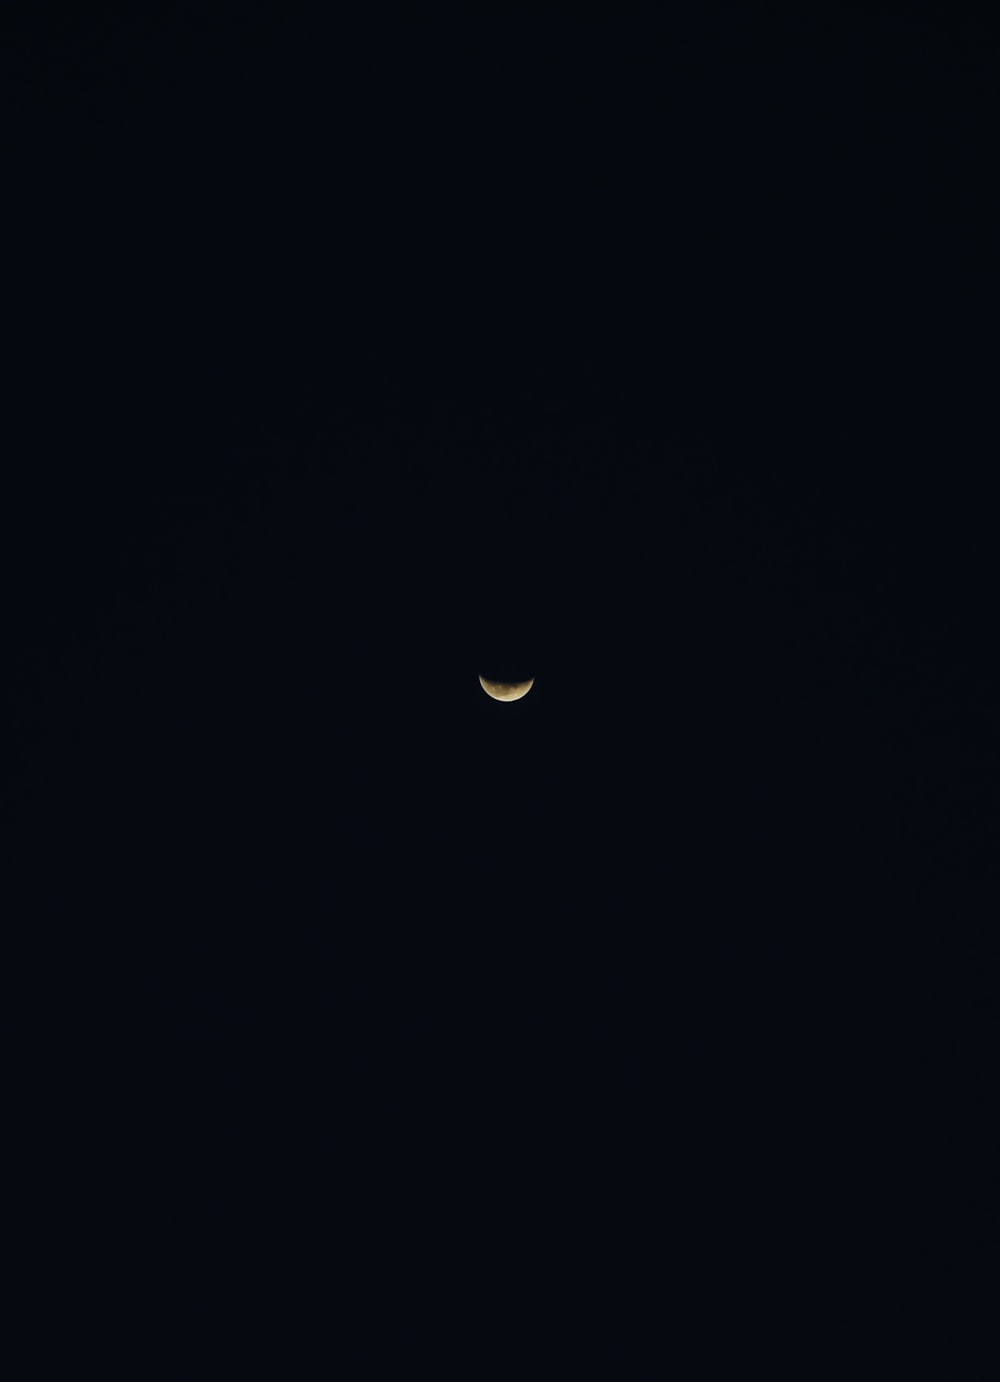 Black Moon Picture. Download Free Image